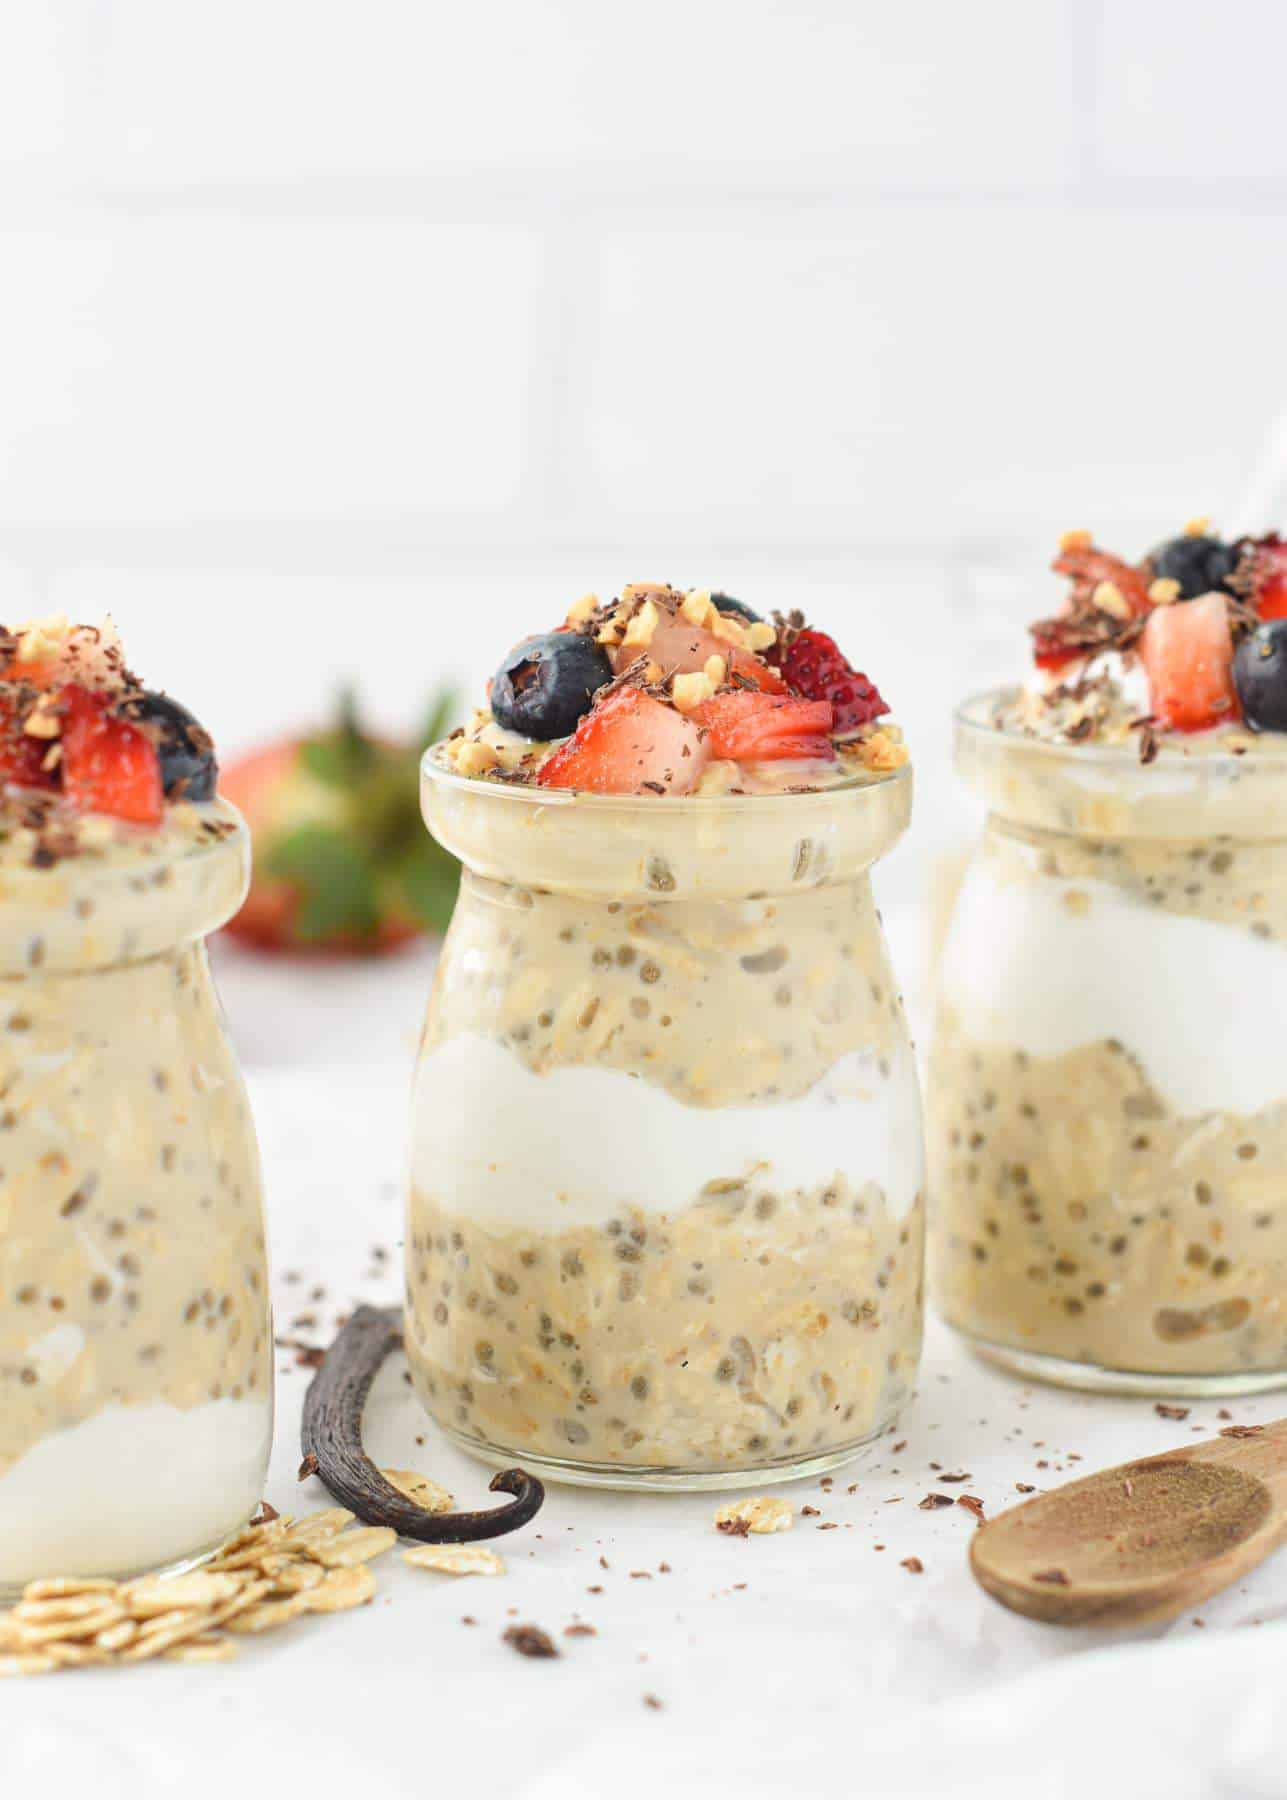 Chia Seed Overnight Oats - Planted in the Kitchen